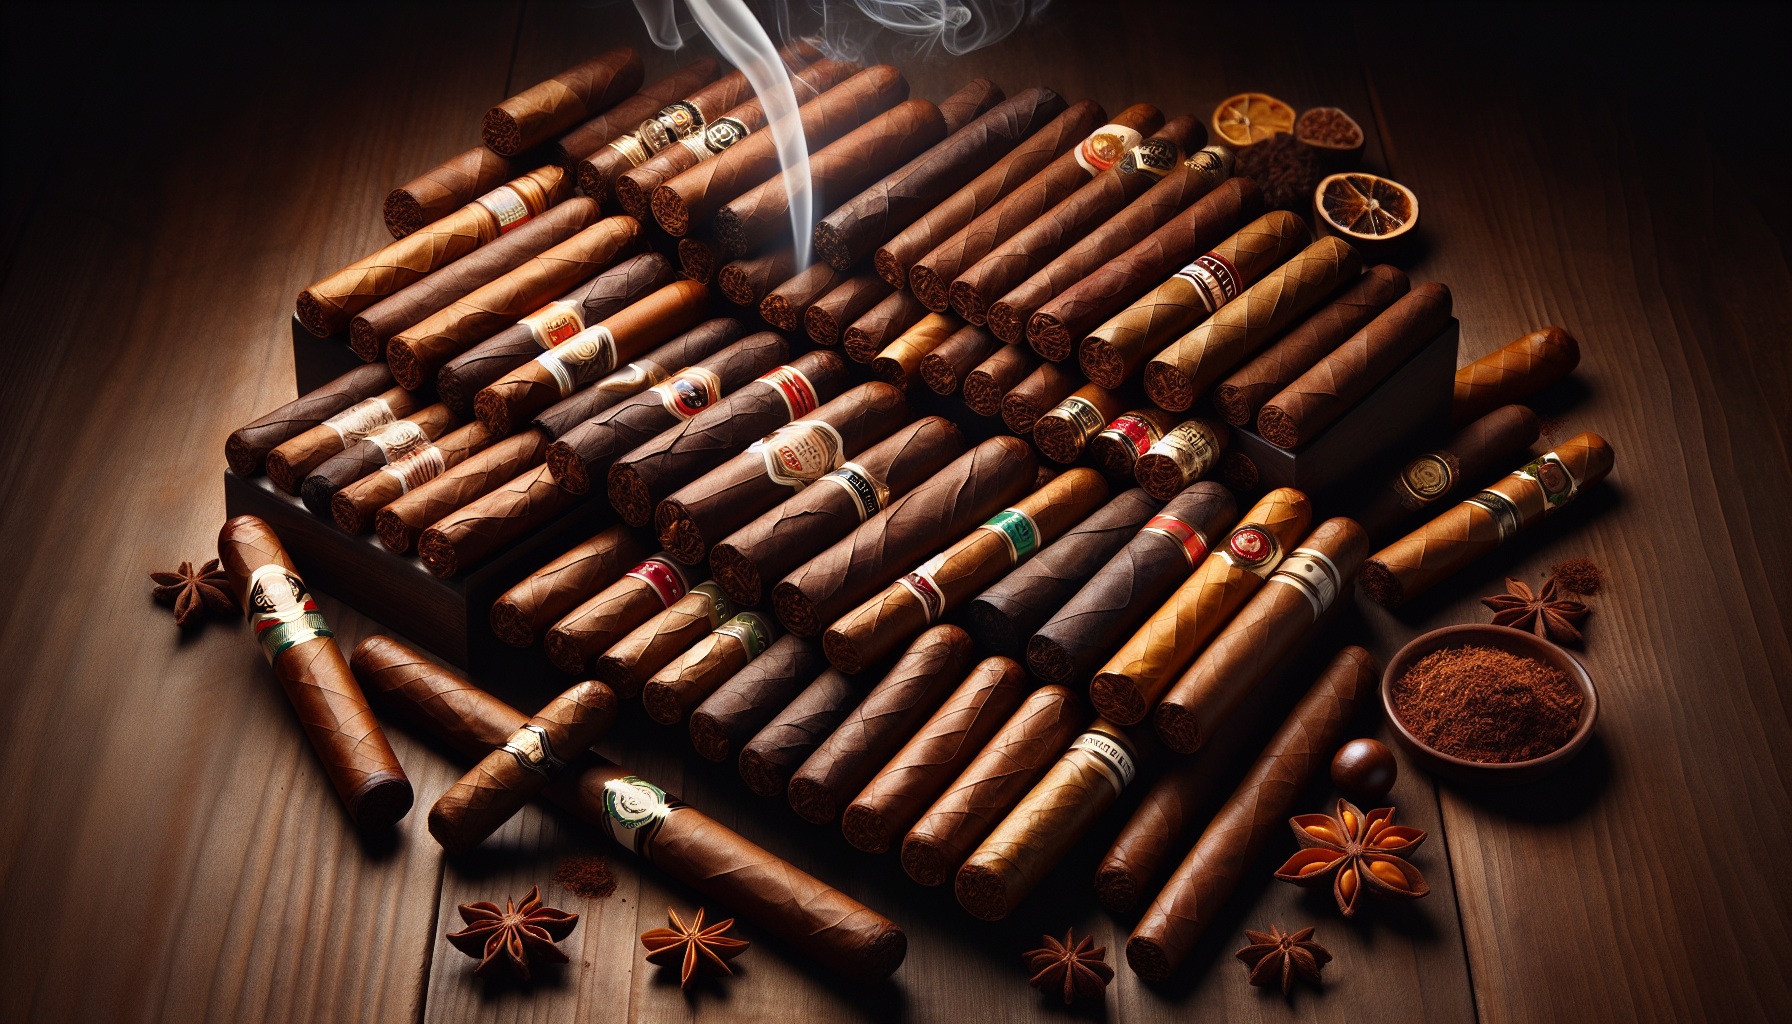 Beginner's guide to single cigars